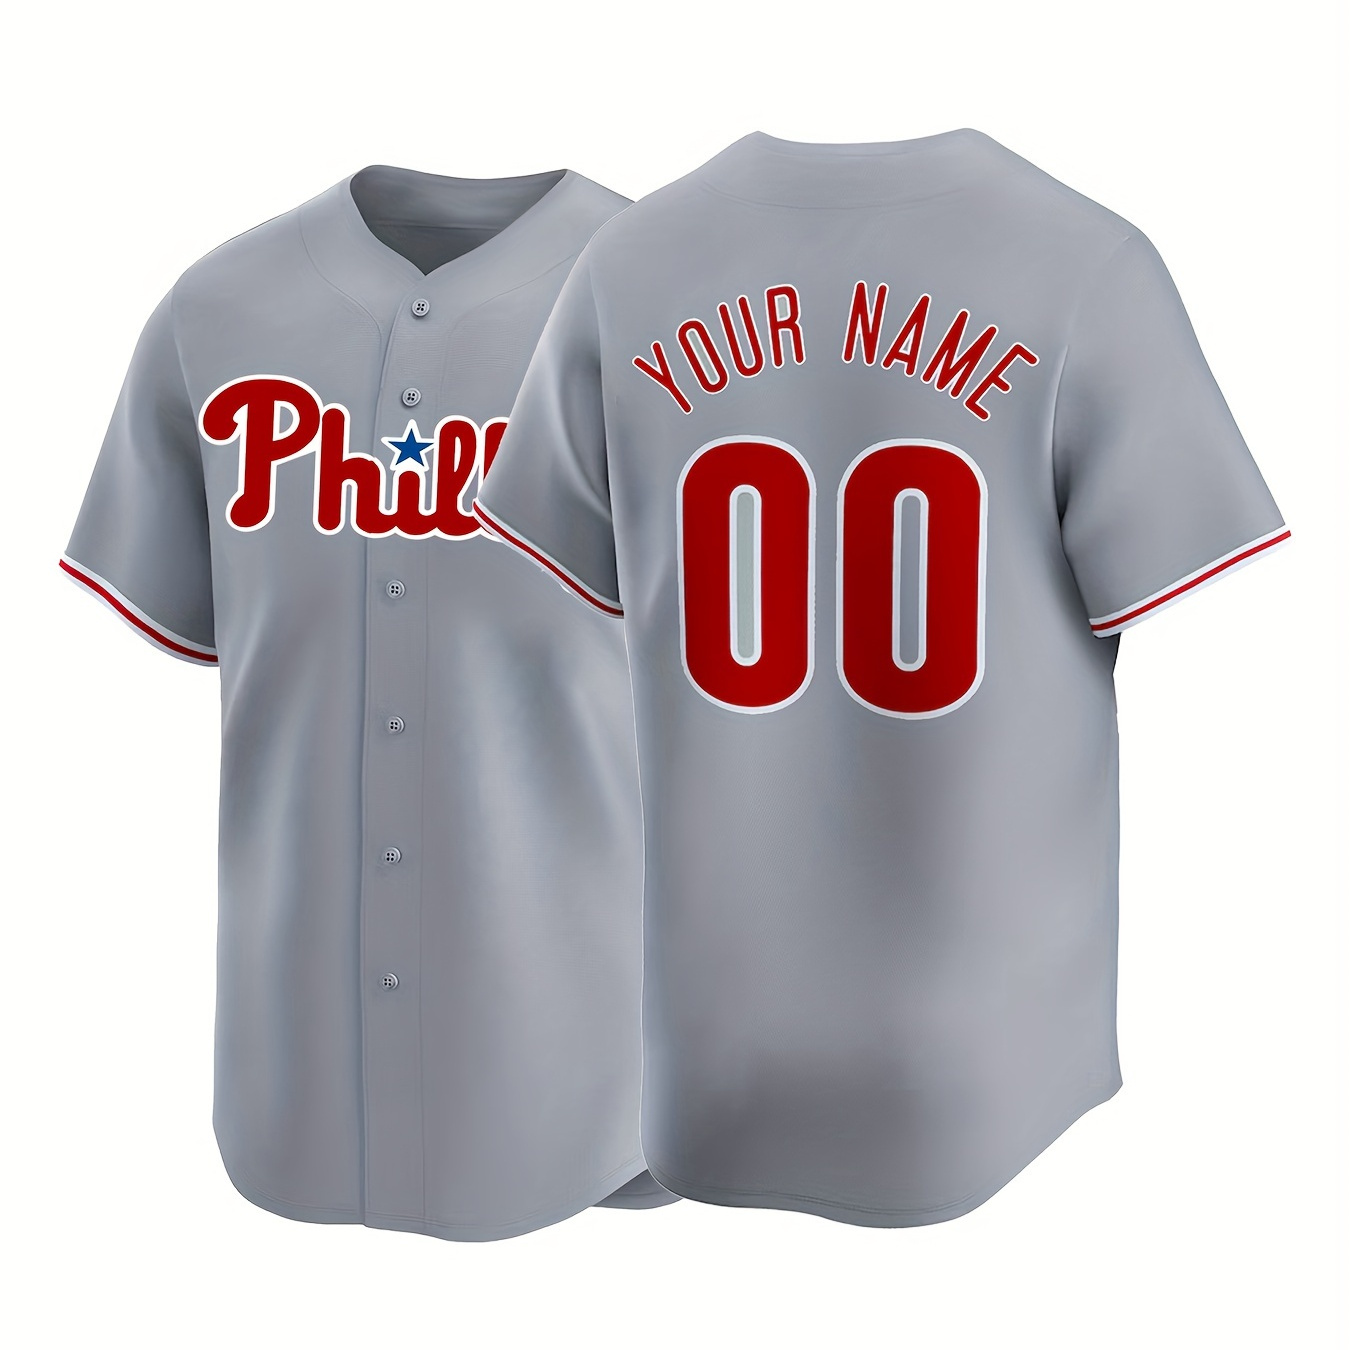 

Customized Name And Number, Philly Embroidery Men's Baseball Jersey, Short Sleeve Button Up Sport Tops For Summer Training And Outdoors Wear